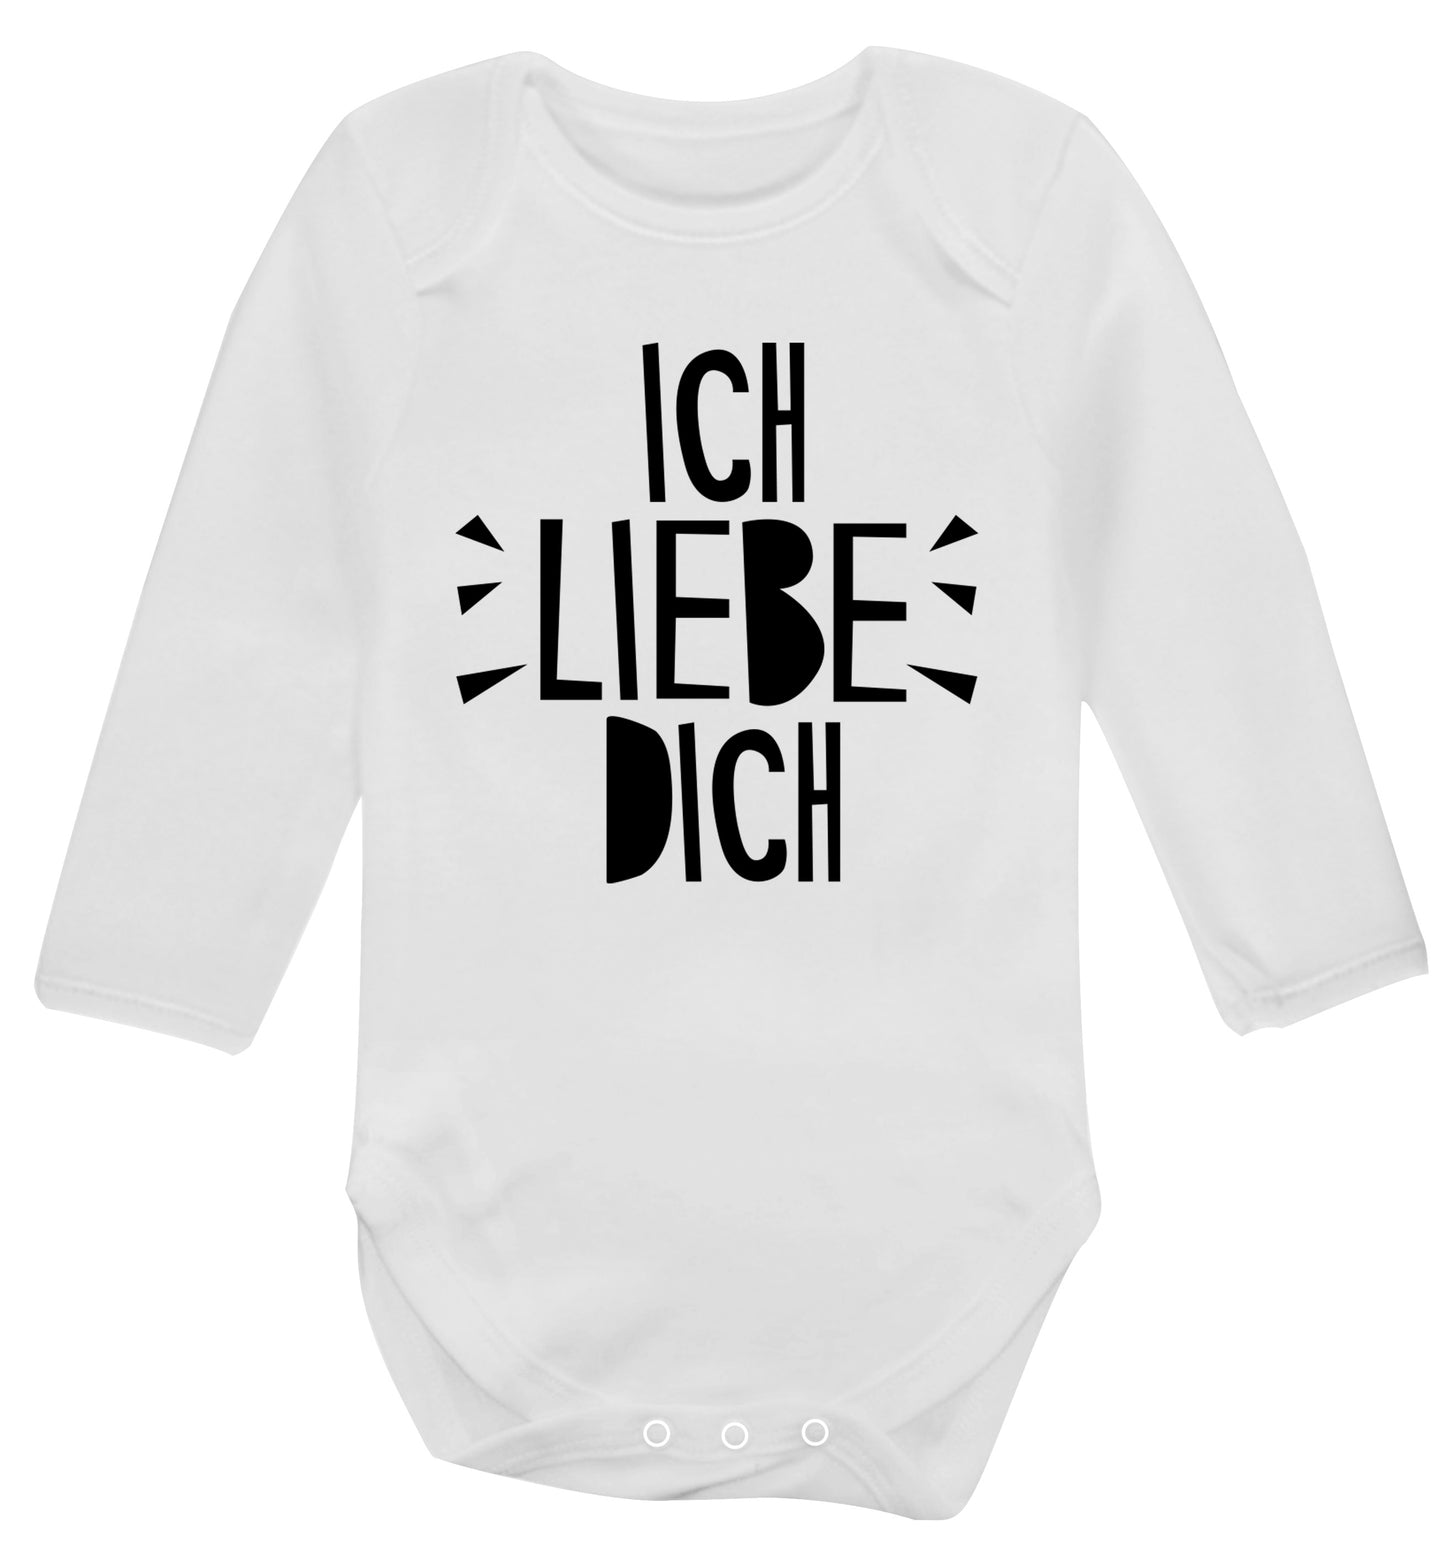 Ich liebe dich - I love you Baby Vest long sleeved white 6-12 months